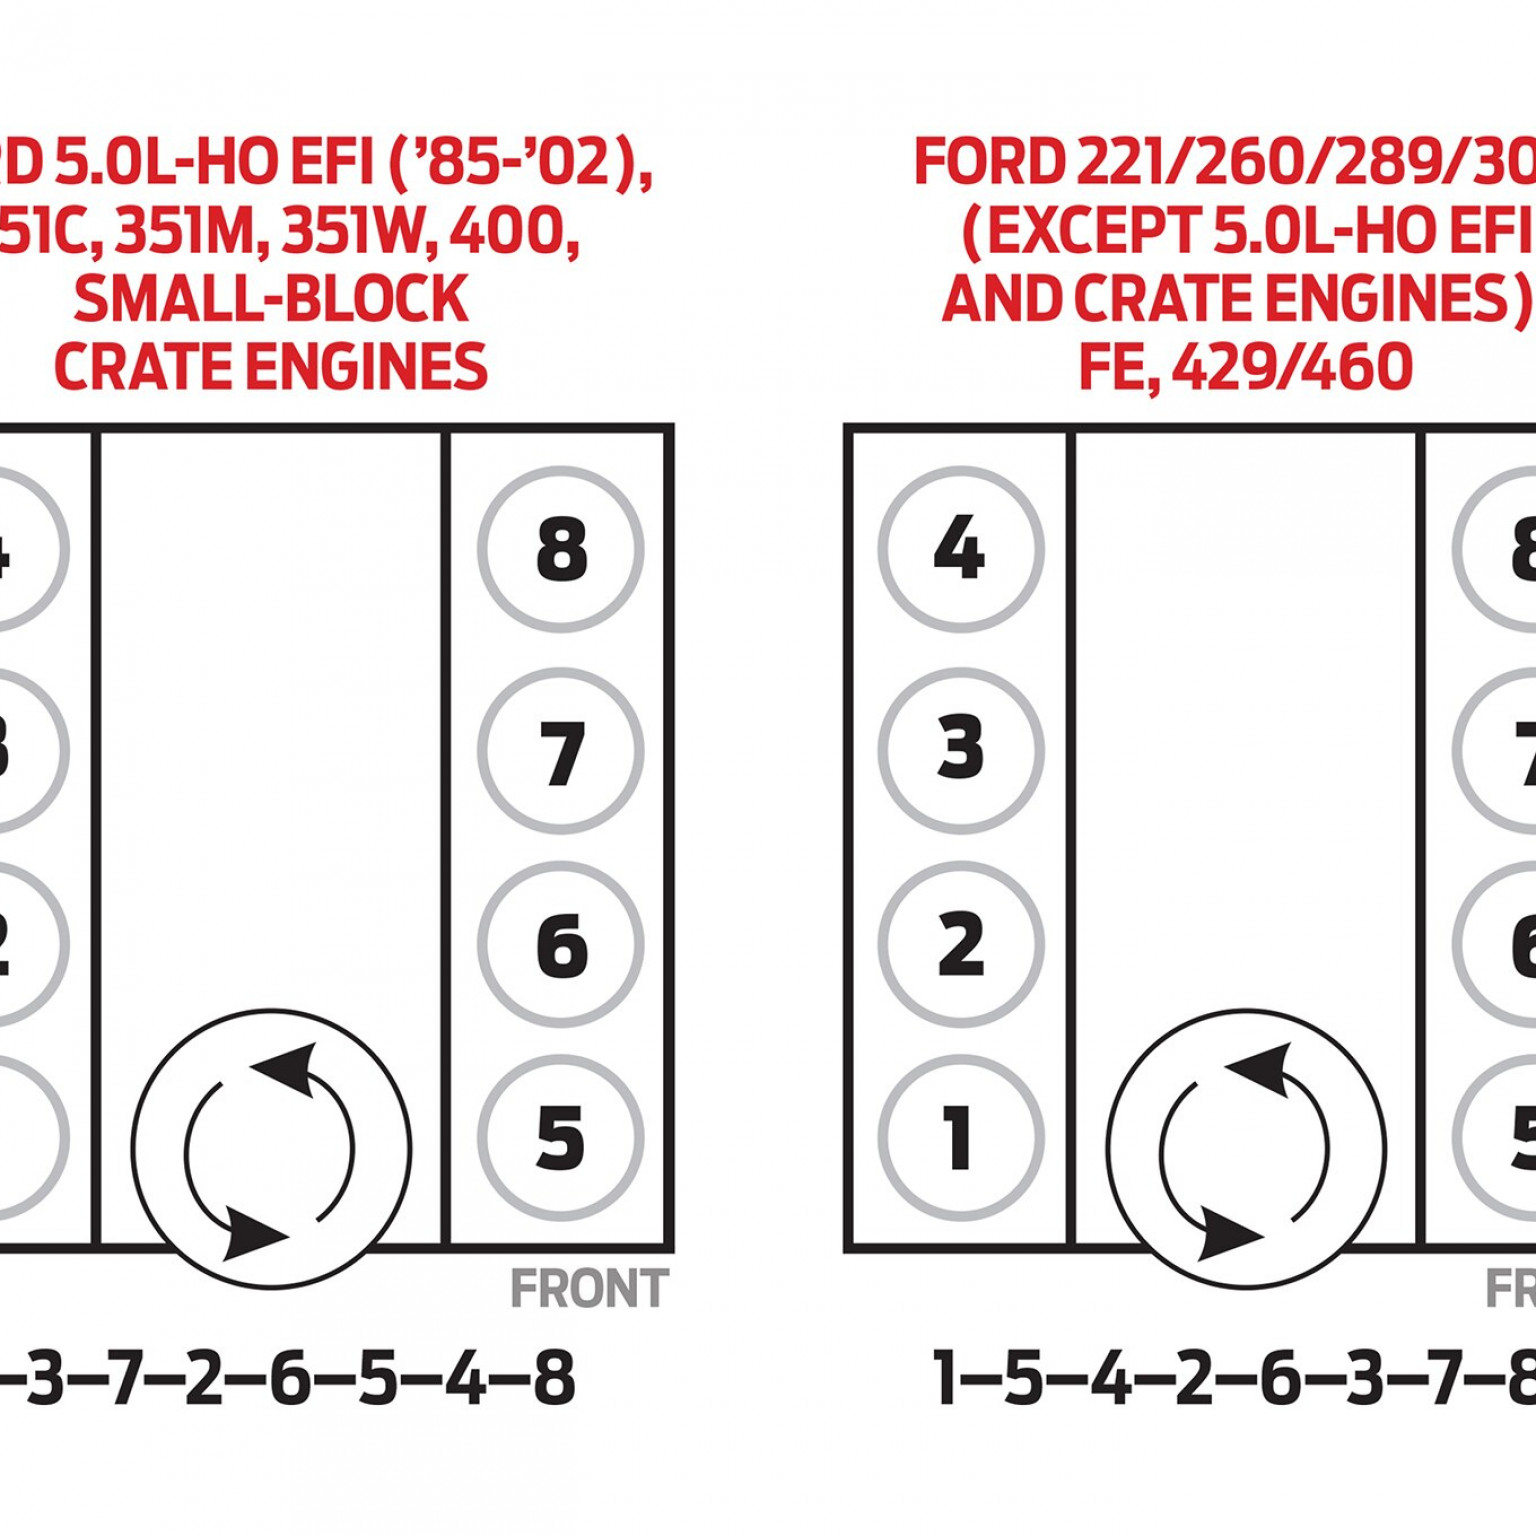 Ford 302 Ho Firing Order | Wiring and Printable